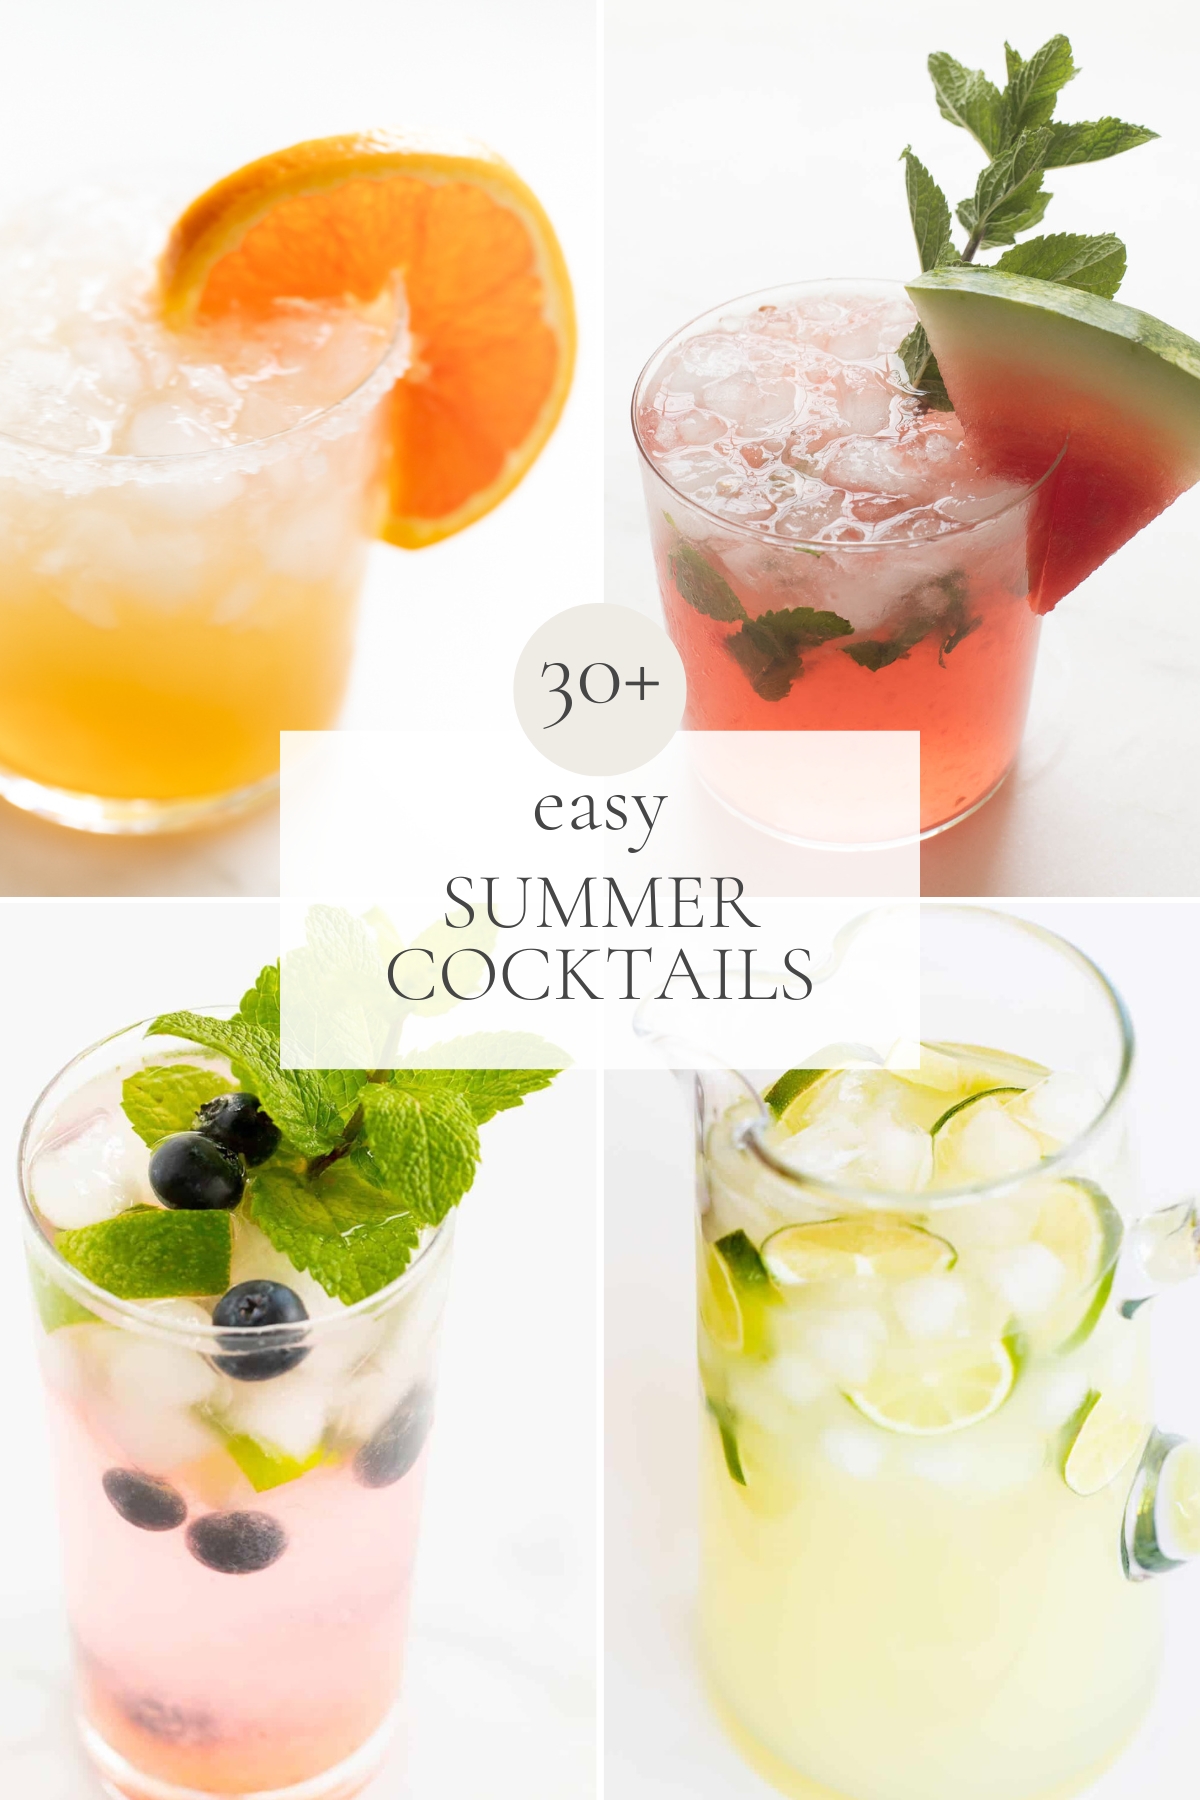 A graphic image of four different cocktails, with a headline across the center that reads "30+ Easy Summer Cocktails" 